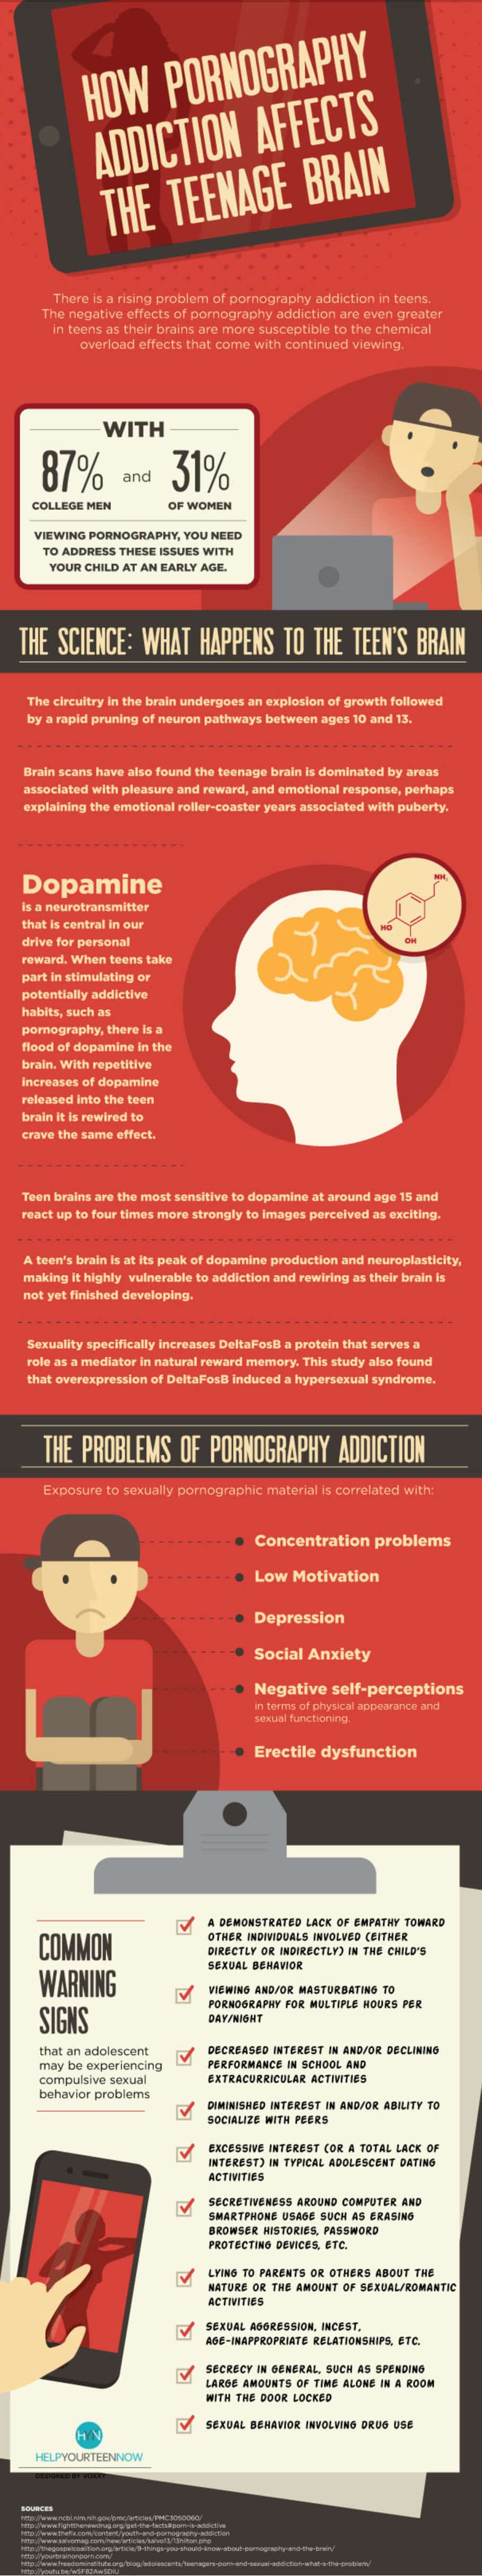 Poronograph - How Pornography Affects the Teenage Brain - An Infographic | Council on  Recovery